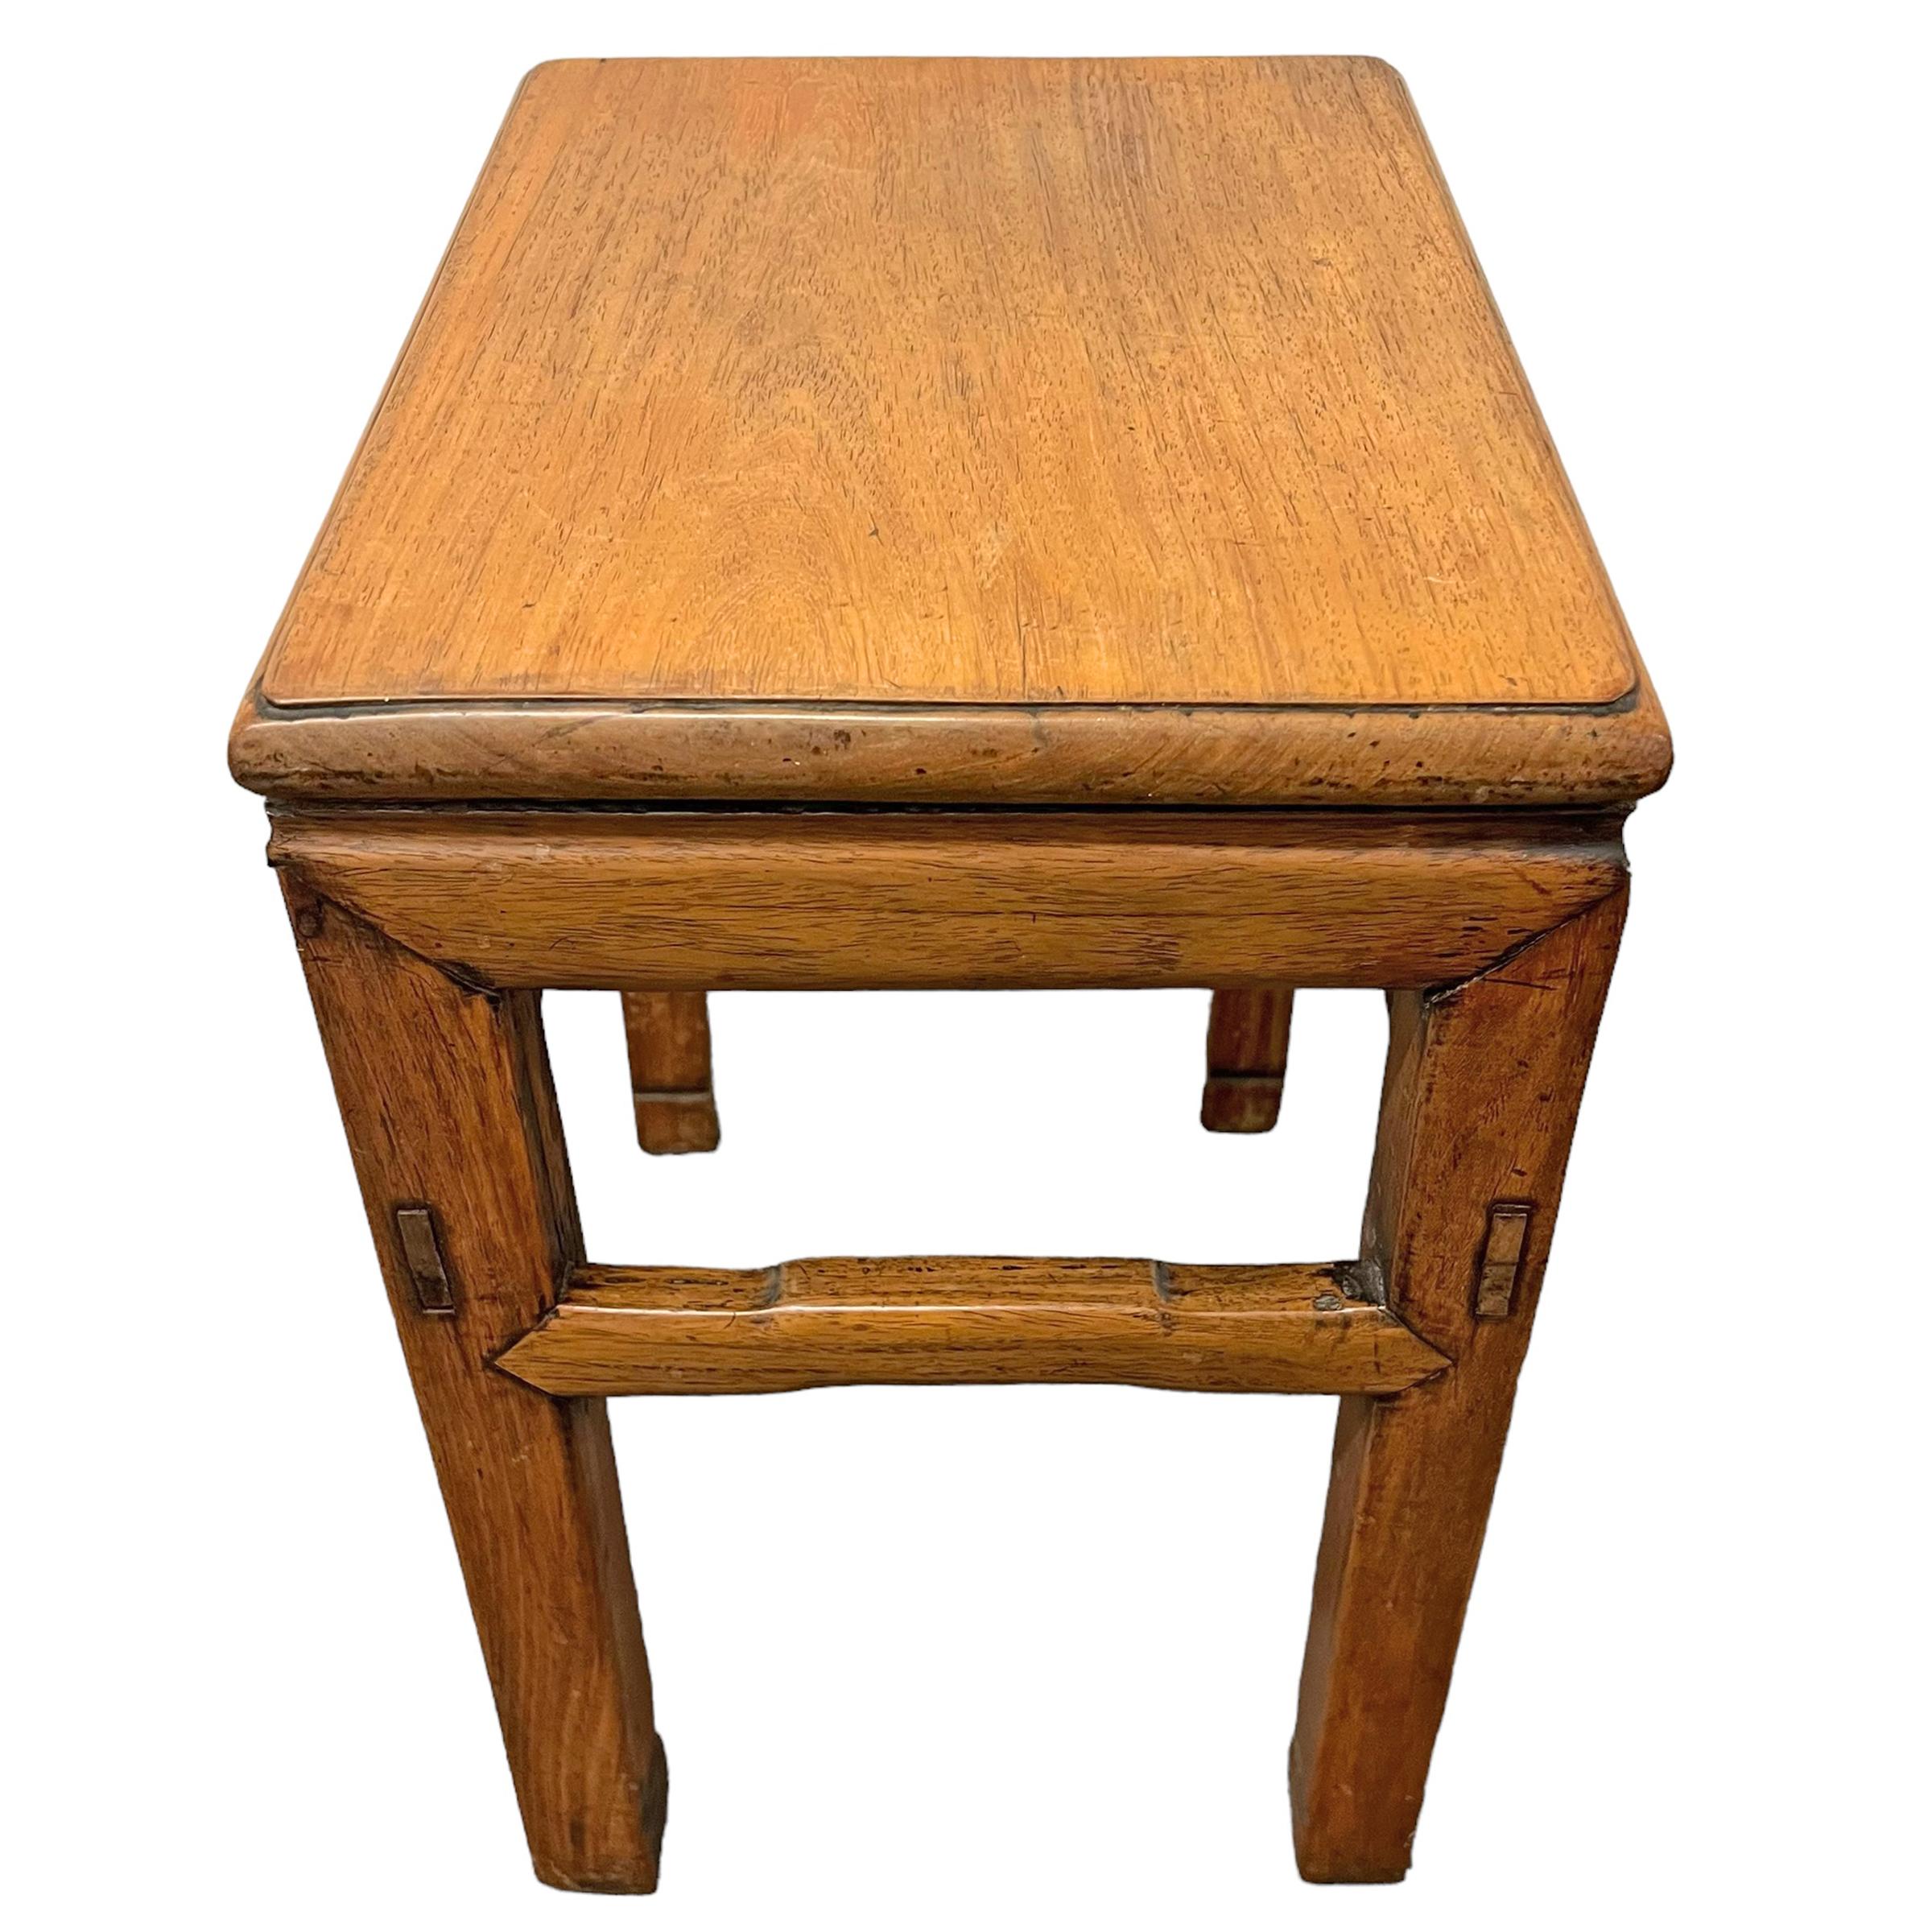 Hardwood Late 17th/Early 18th Century Chinese Huanghuali Scholar's Stool For Sale